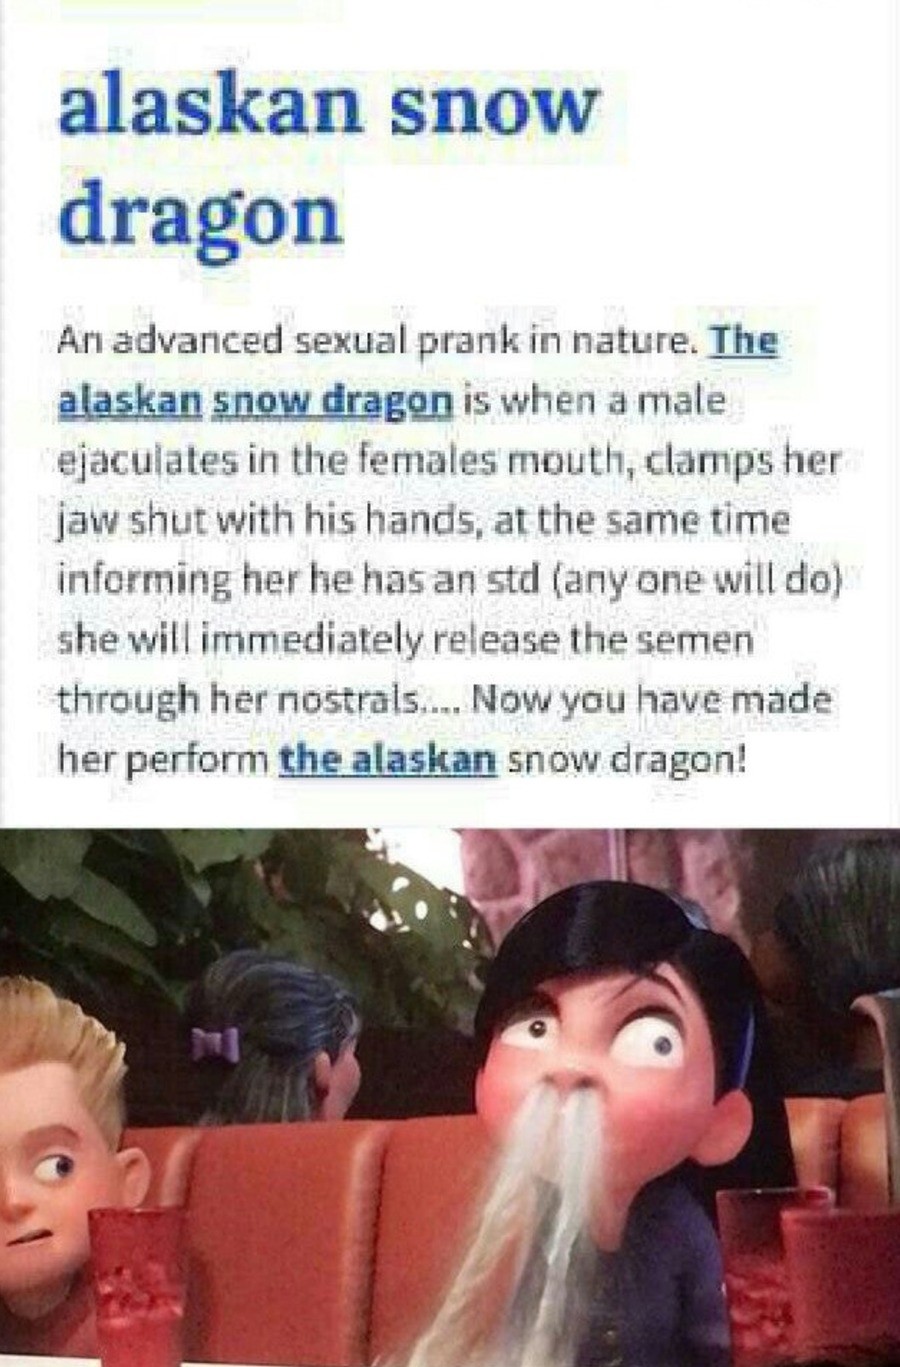 Jul 23, 2021 - a prank like alaska snow dragon may be fun for one but cause...